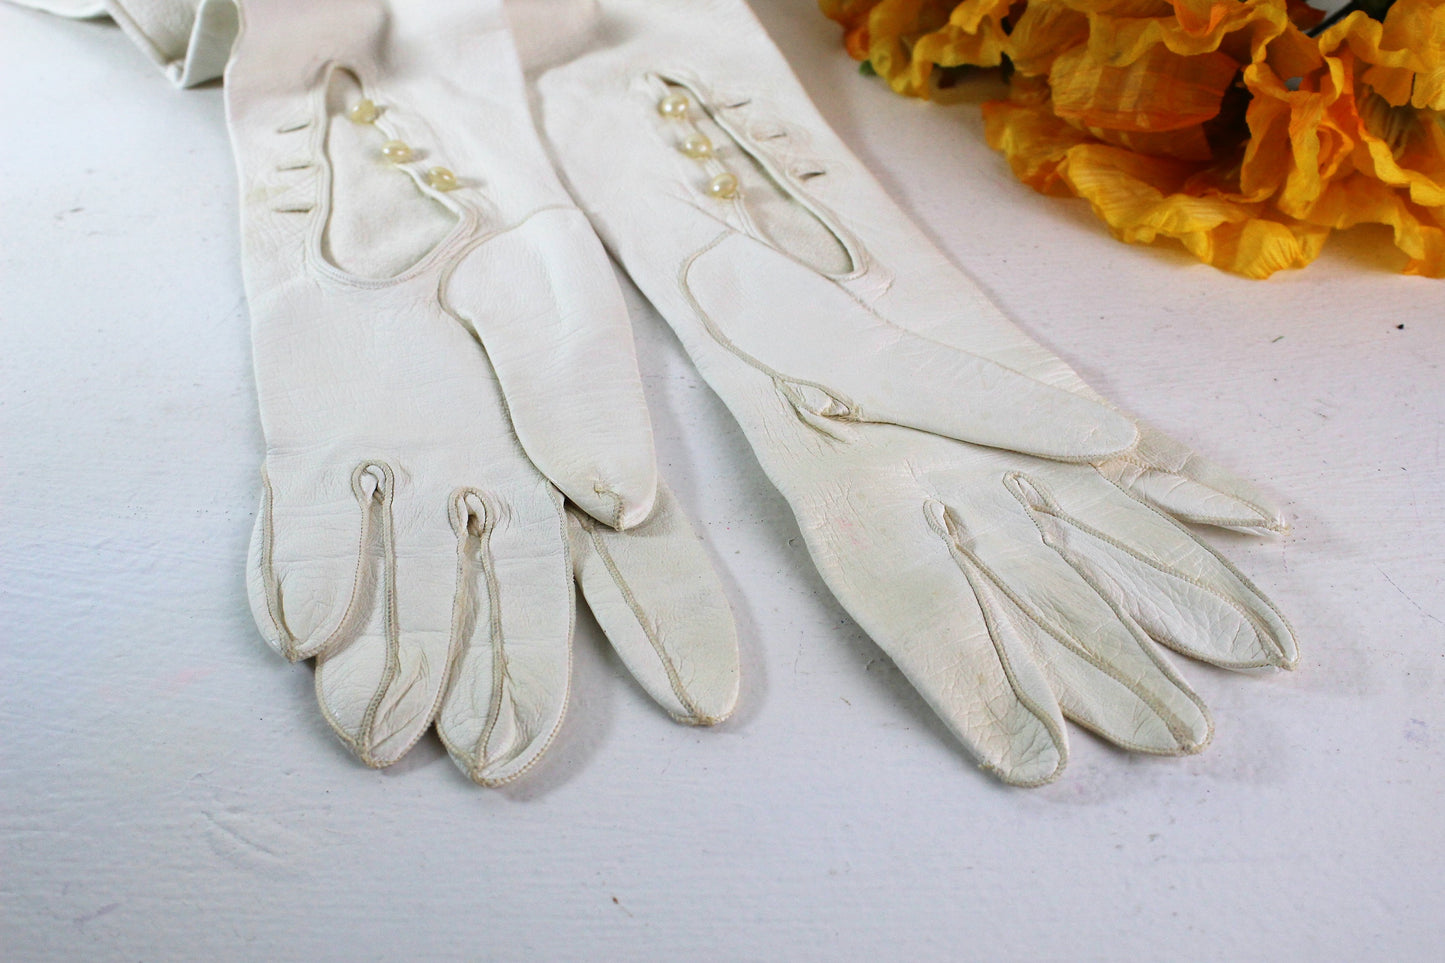 Vintage 1960's ~ 2 Pair Womens White Kid Leather Gloves SMALL 6.5~ One is  NWT